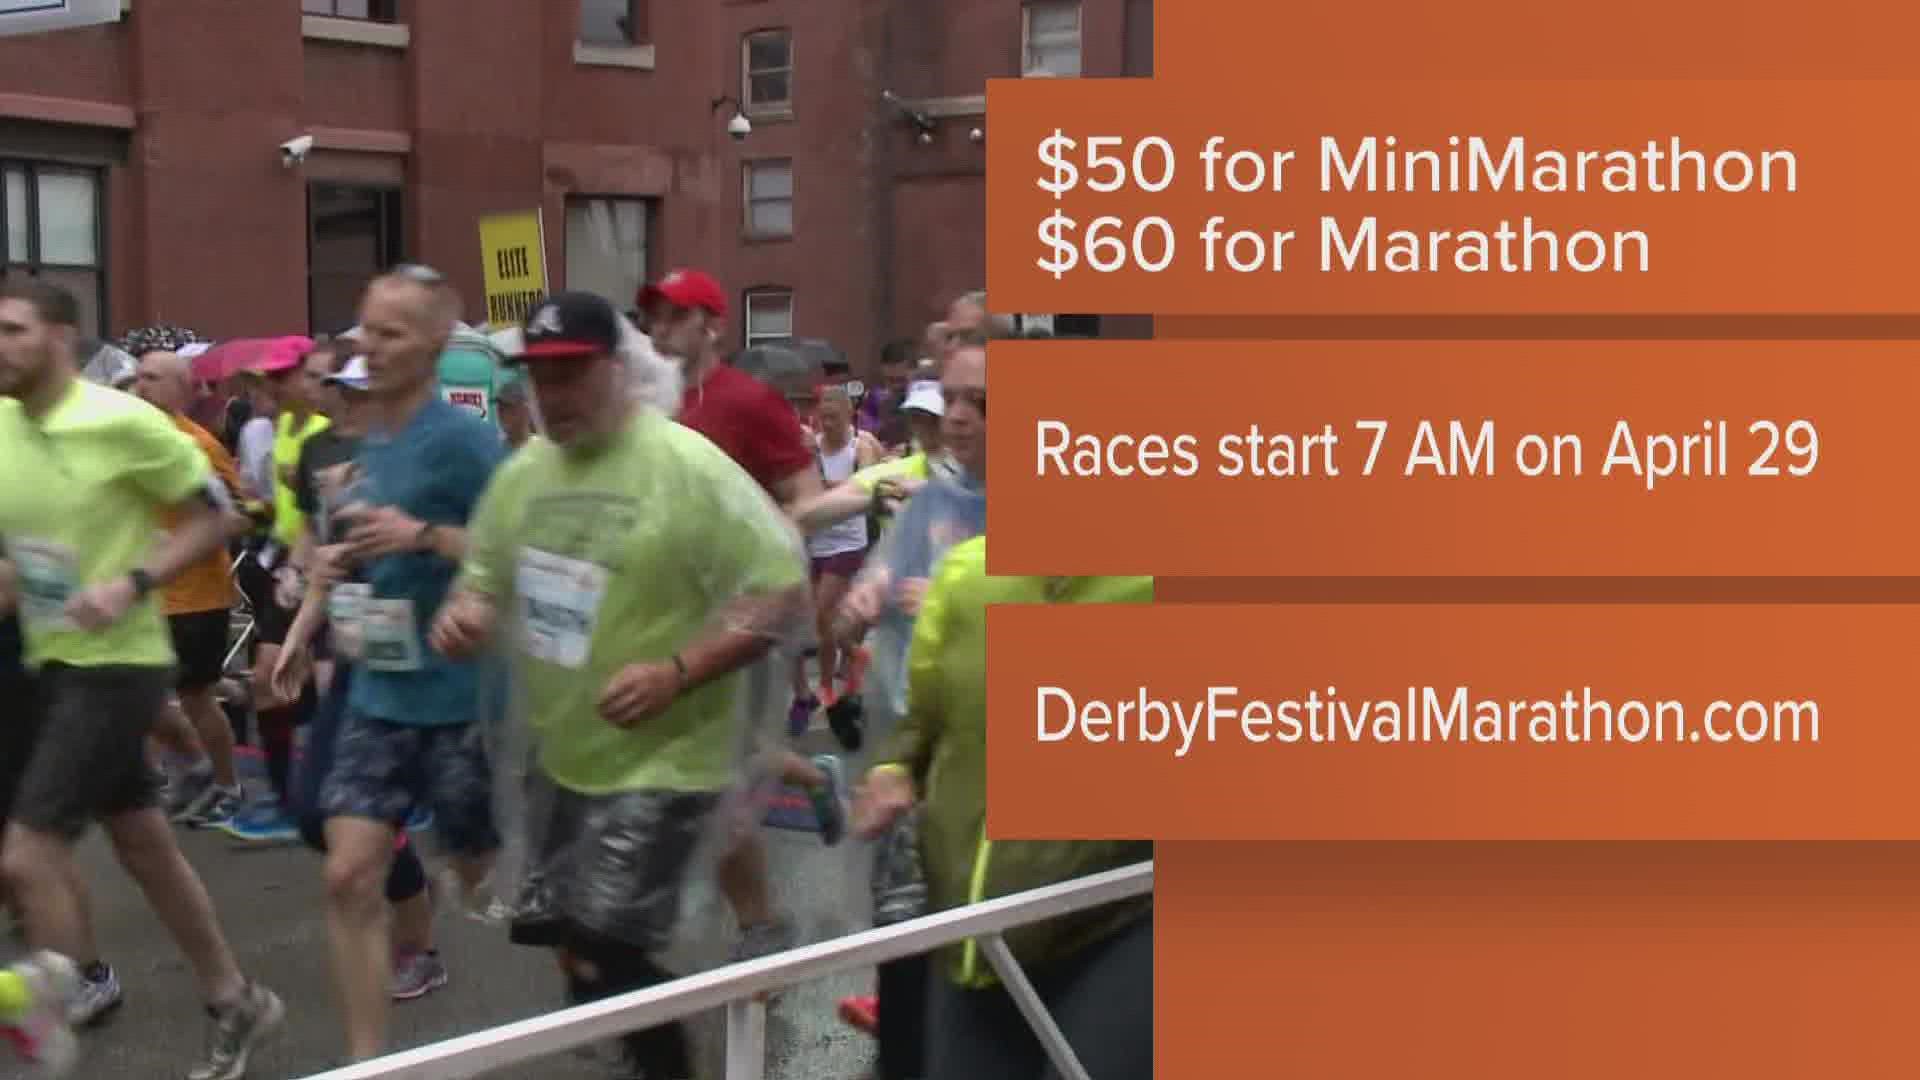 Registration for the Derby's mini and full marathons open Sept. 8. In honor of the 50th anniversary, registration for the mini is just $50 until 11 a.m. Sept. 10.